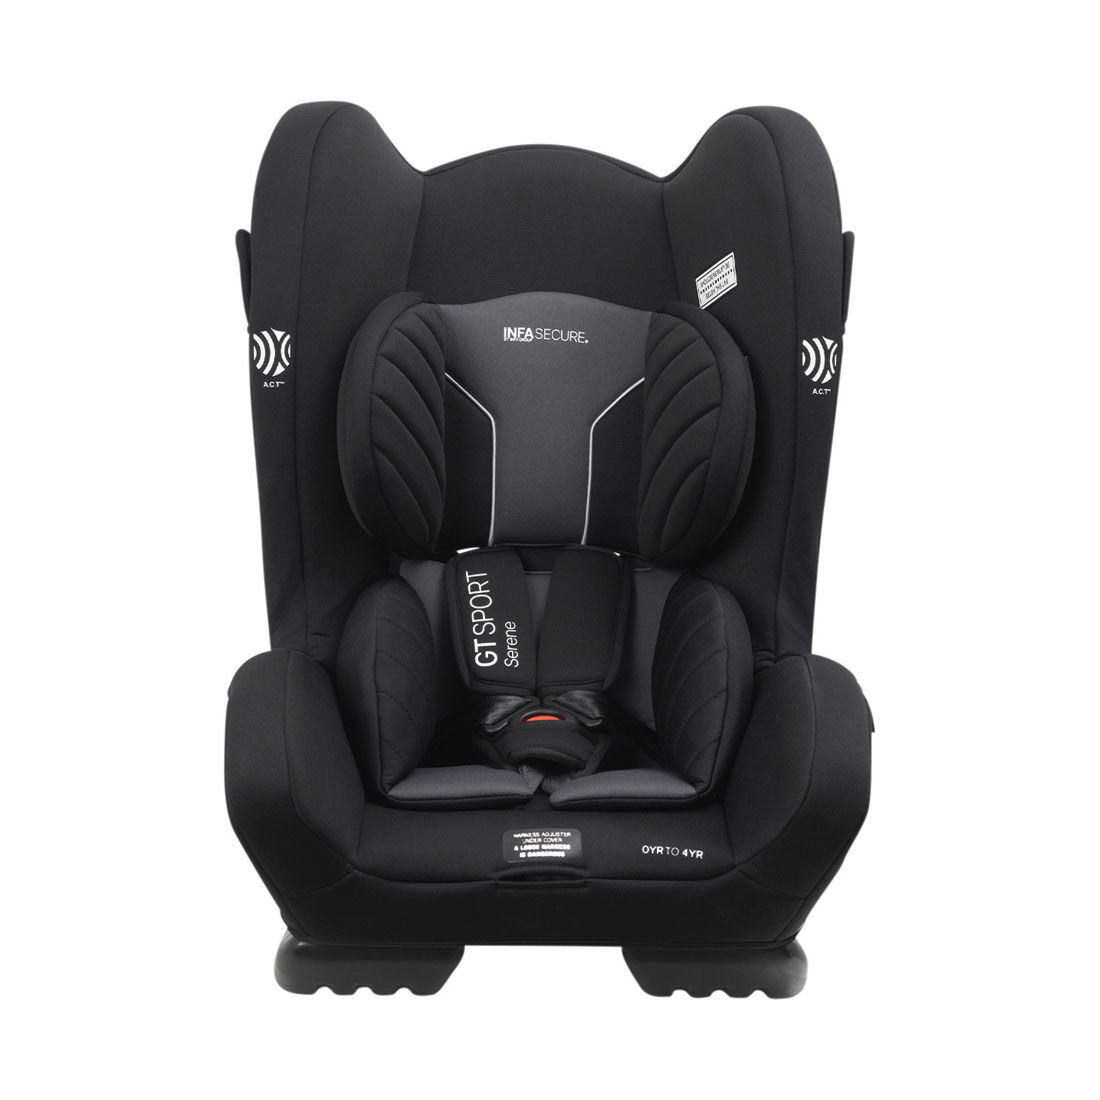 Infasecure GT Serene Convertible Car Seat, , scaau_hi-res